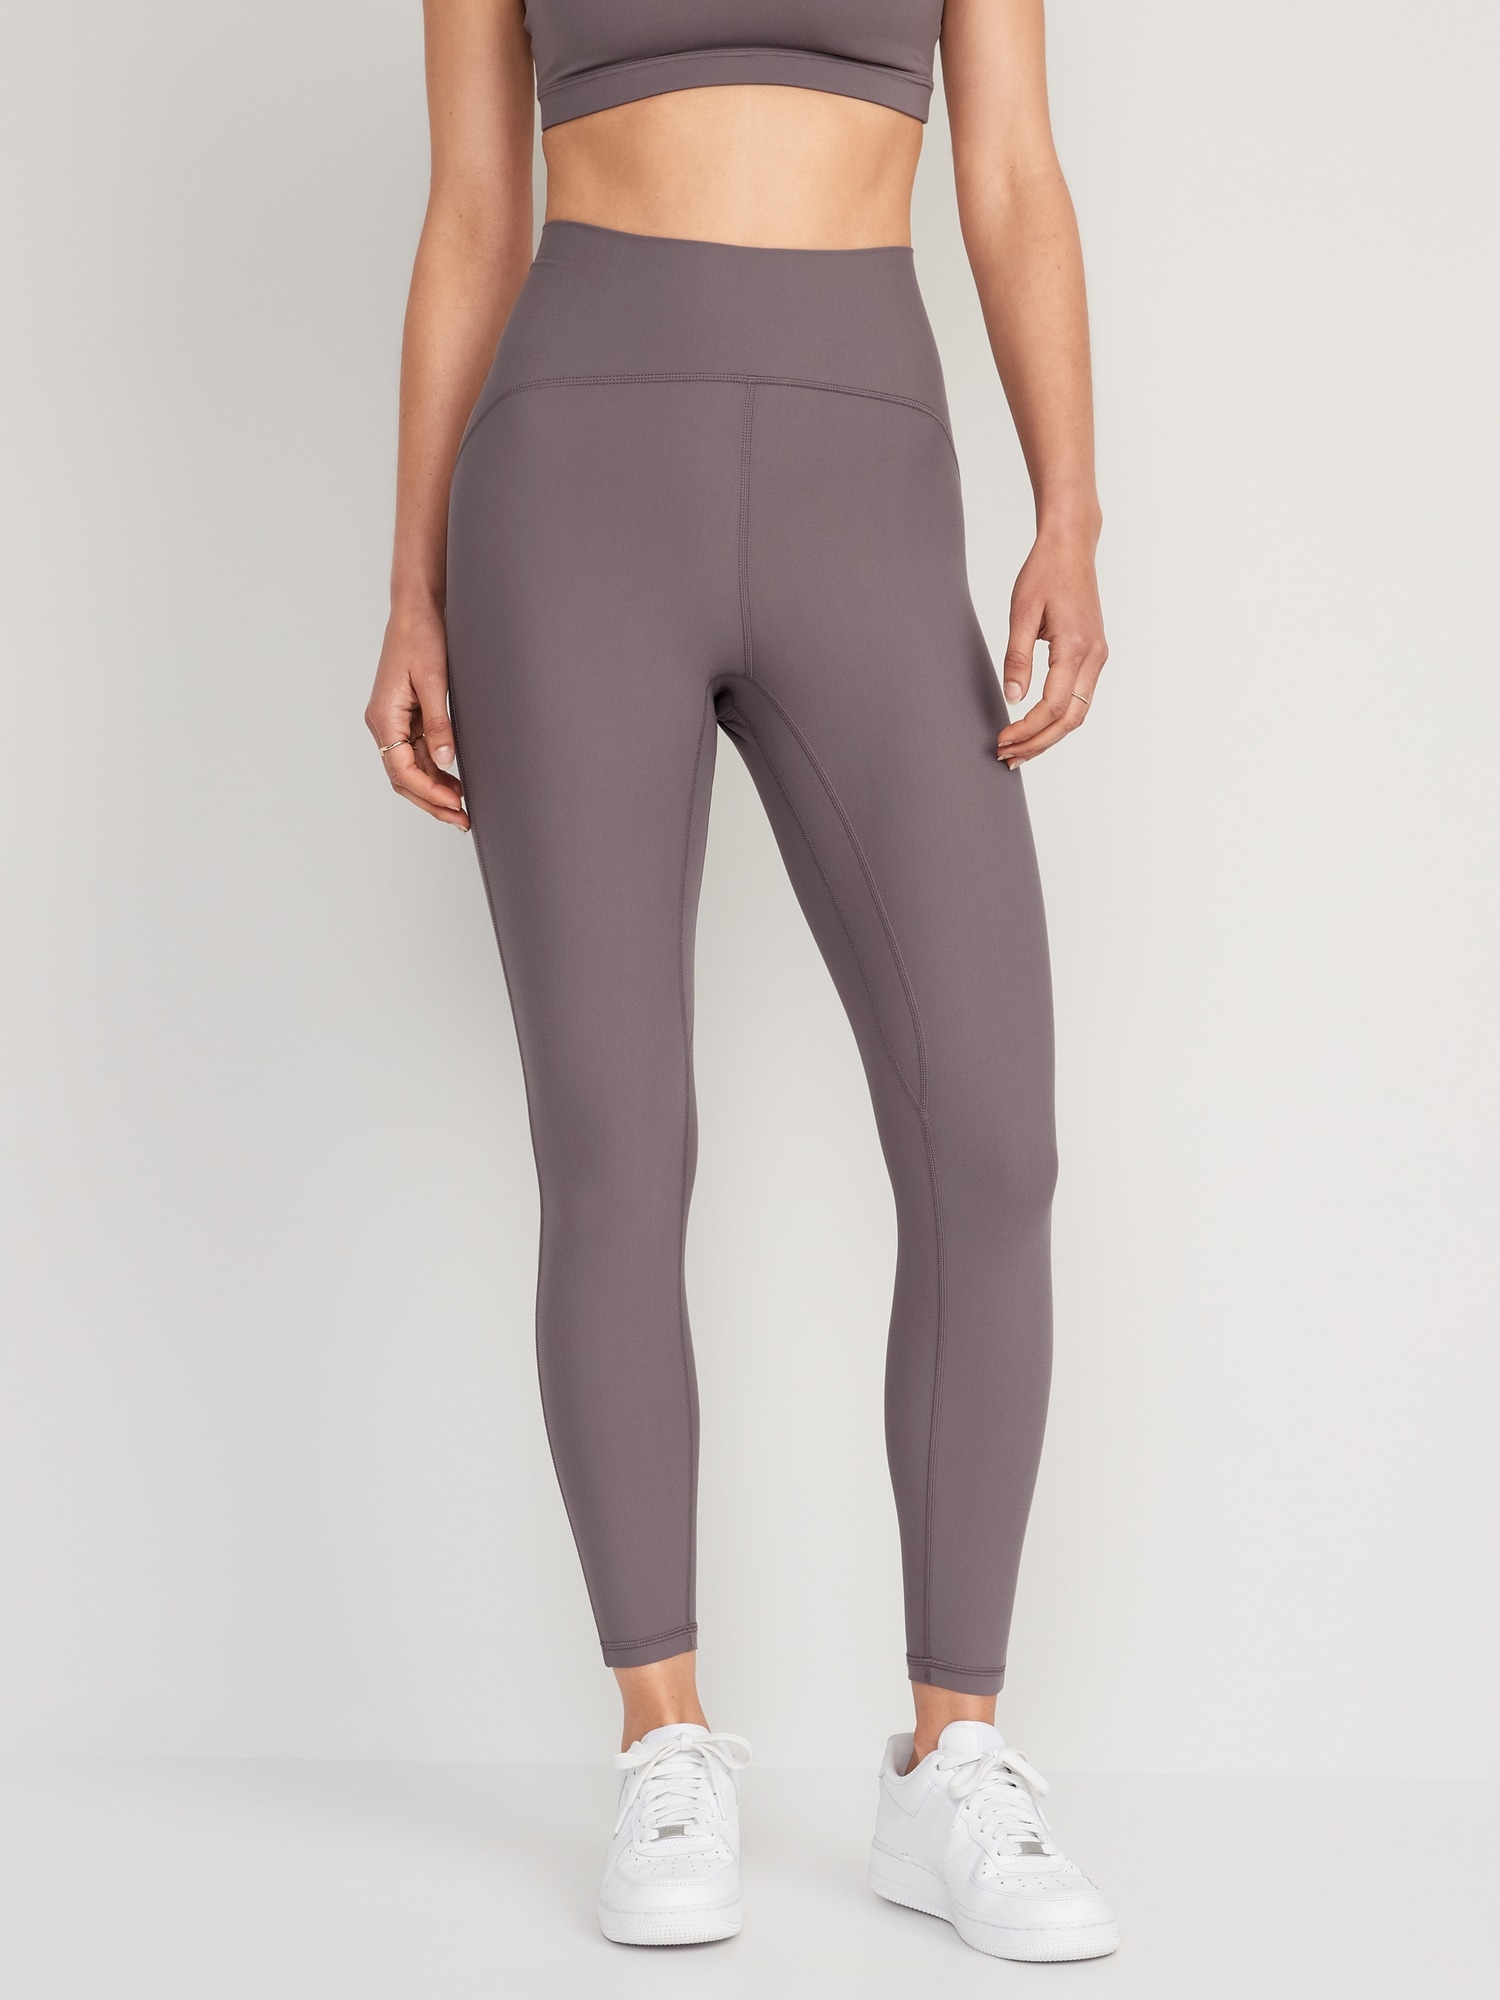 Womens Large Size Exercise Pants For Women For Running, Fitness, And Yoga  Tight And Comfortable Sports Clothes From Yqlchpchx888, $12.76